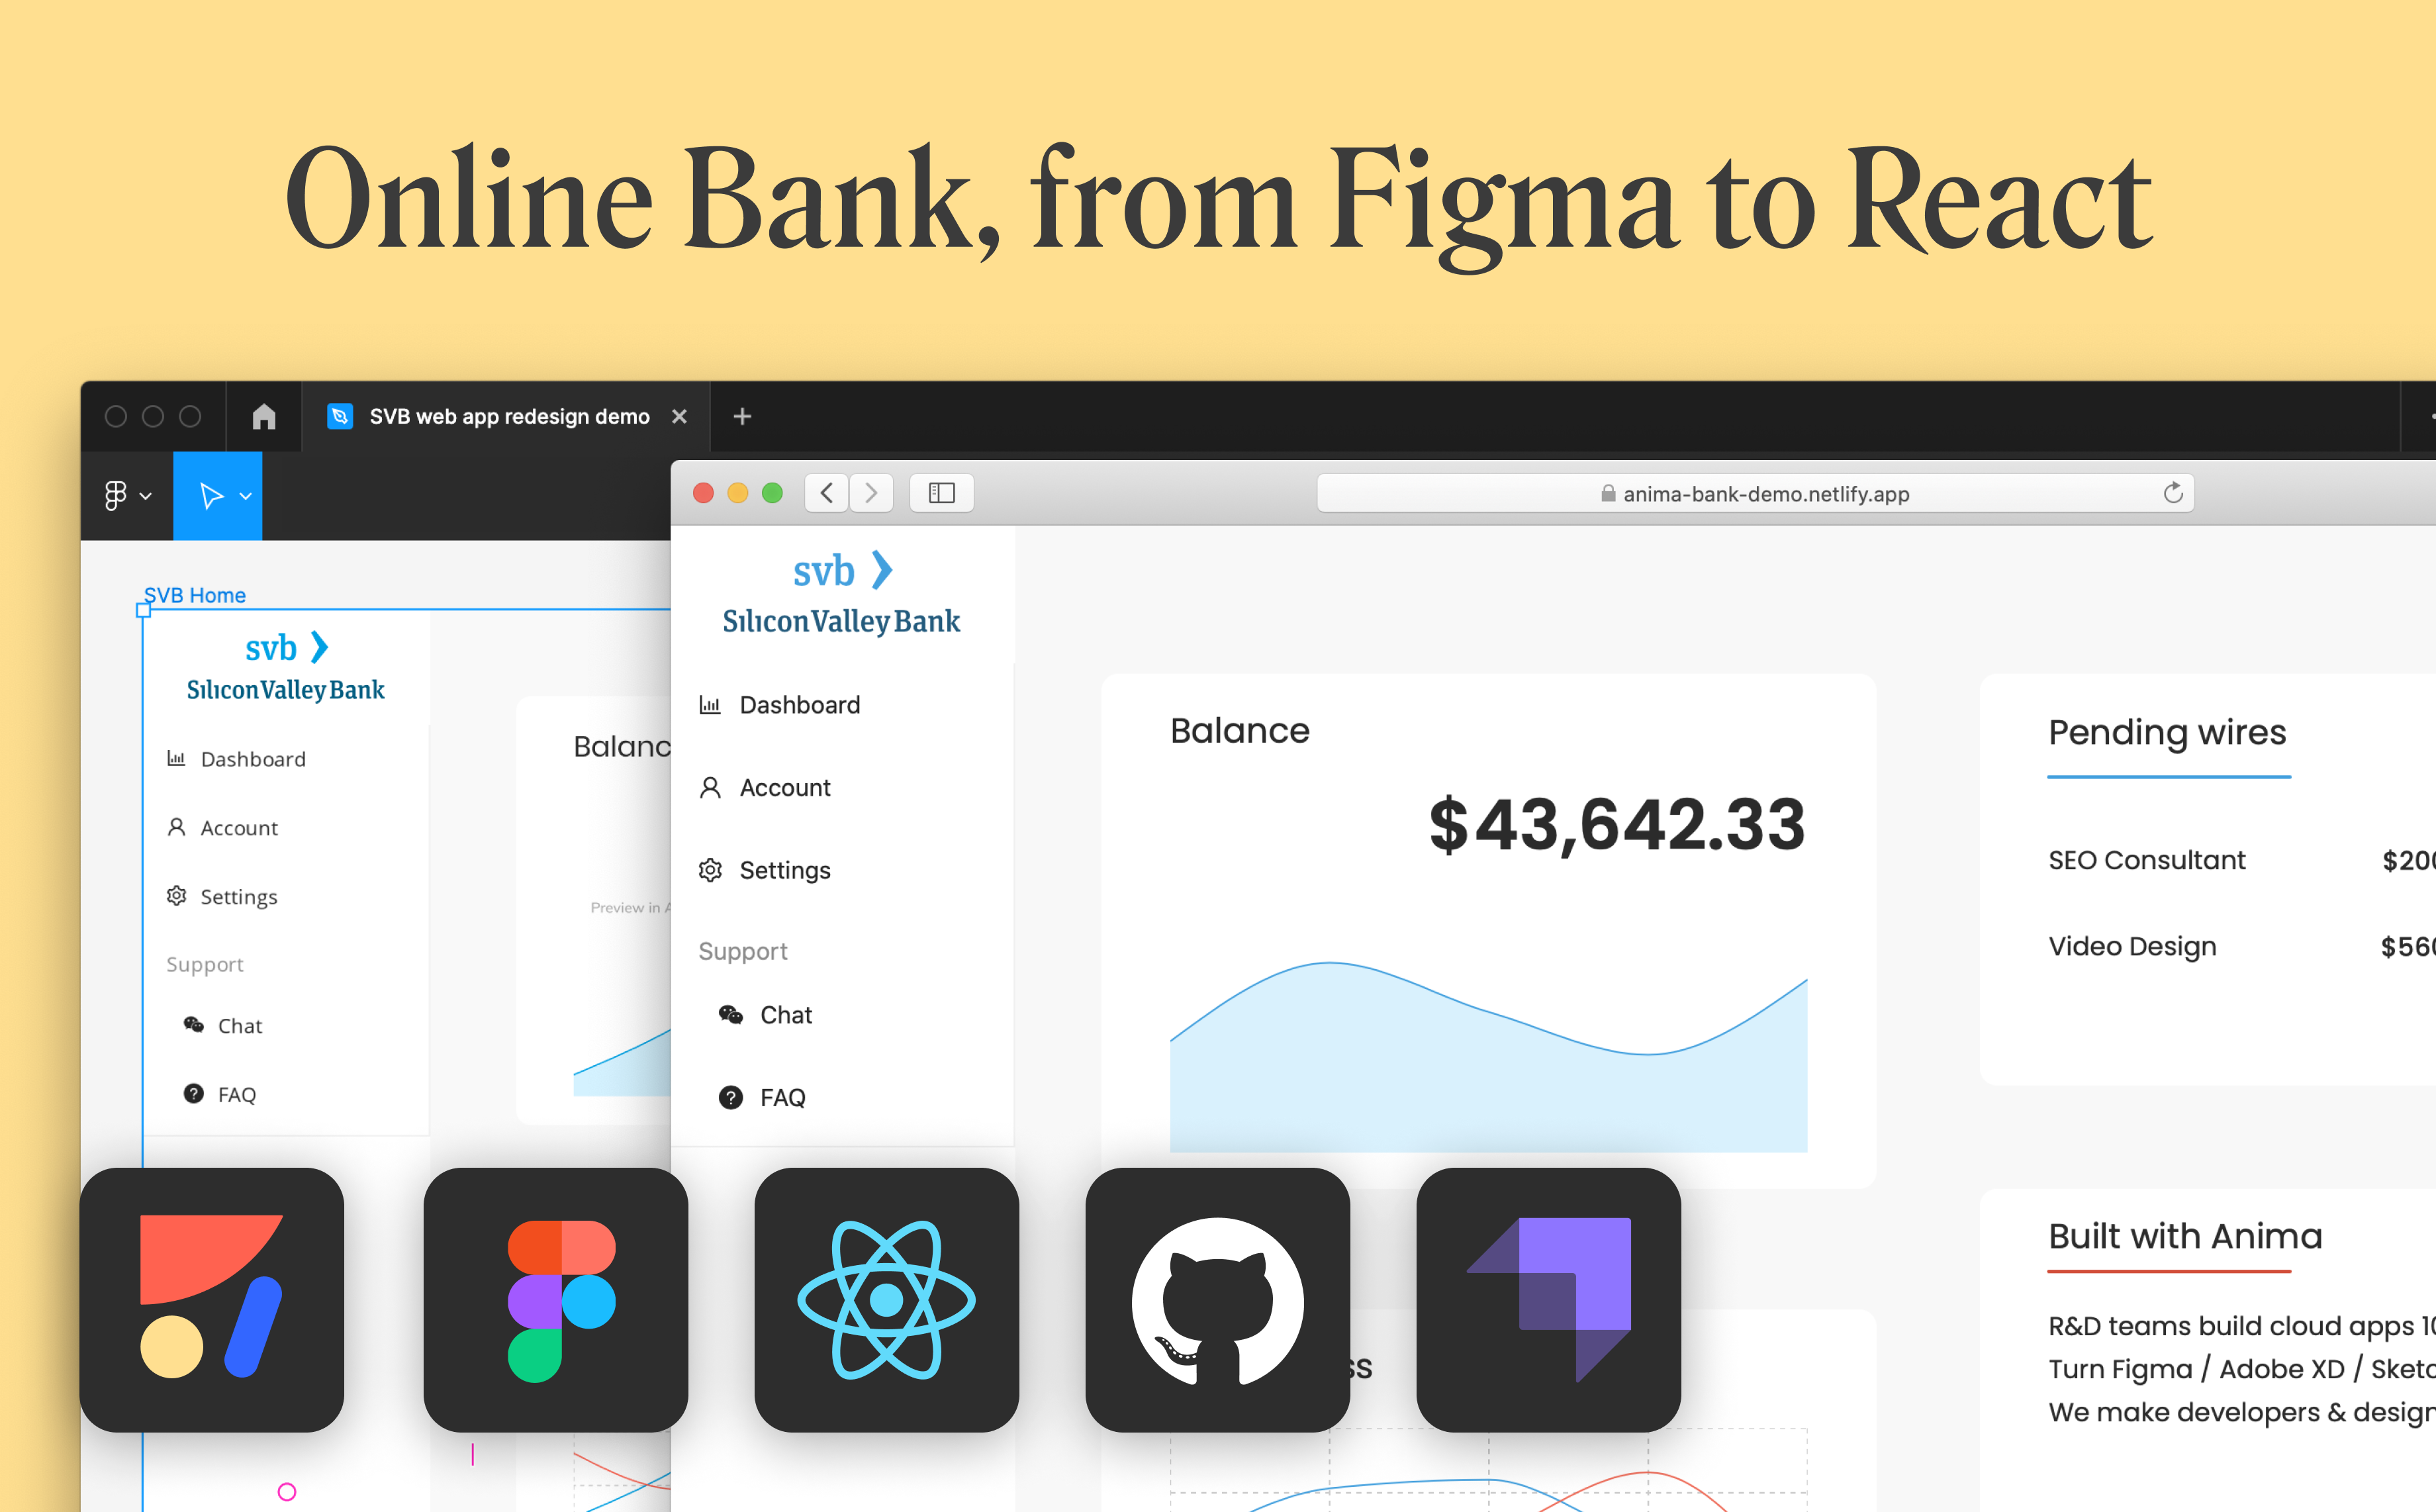 Online bank, from Figma to React